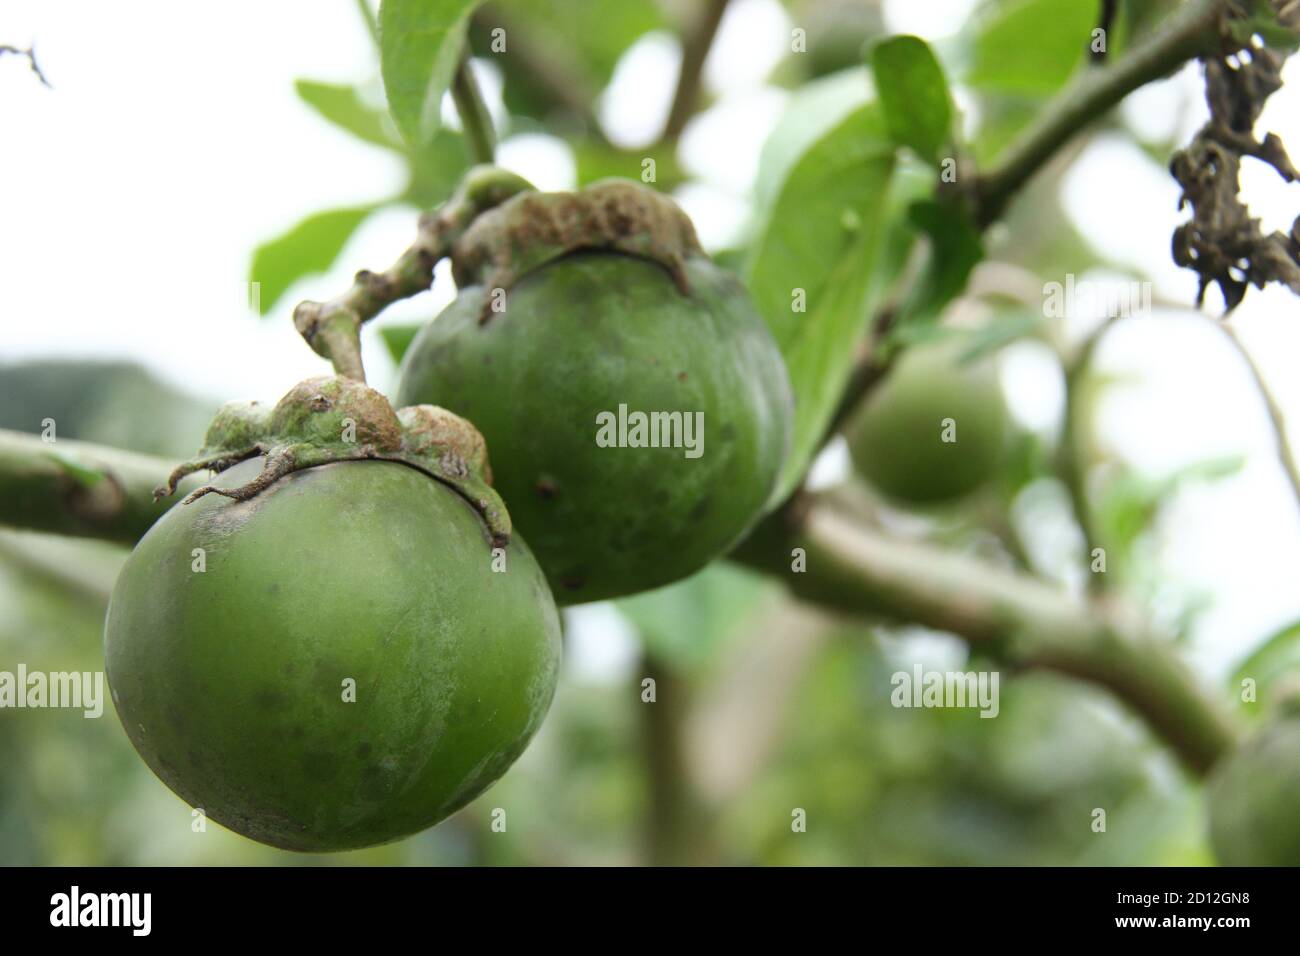 tree (Garcinia mangostana) which bears fruit. green mangosteen that is still raw against a background of green gardens. lush tropical plant Stock Photo Alamy